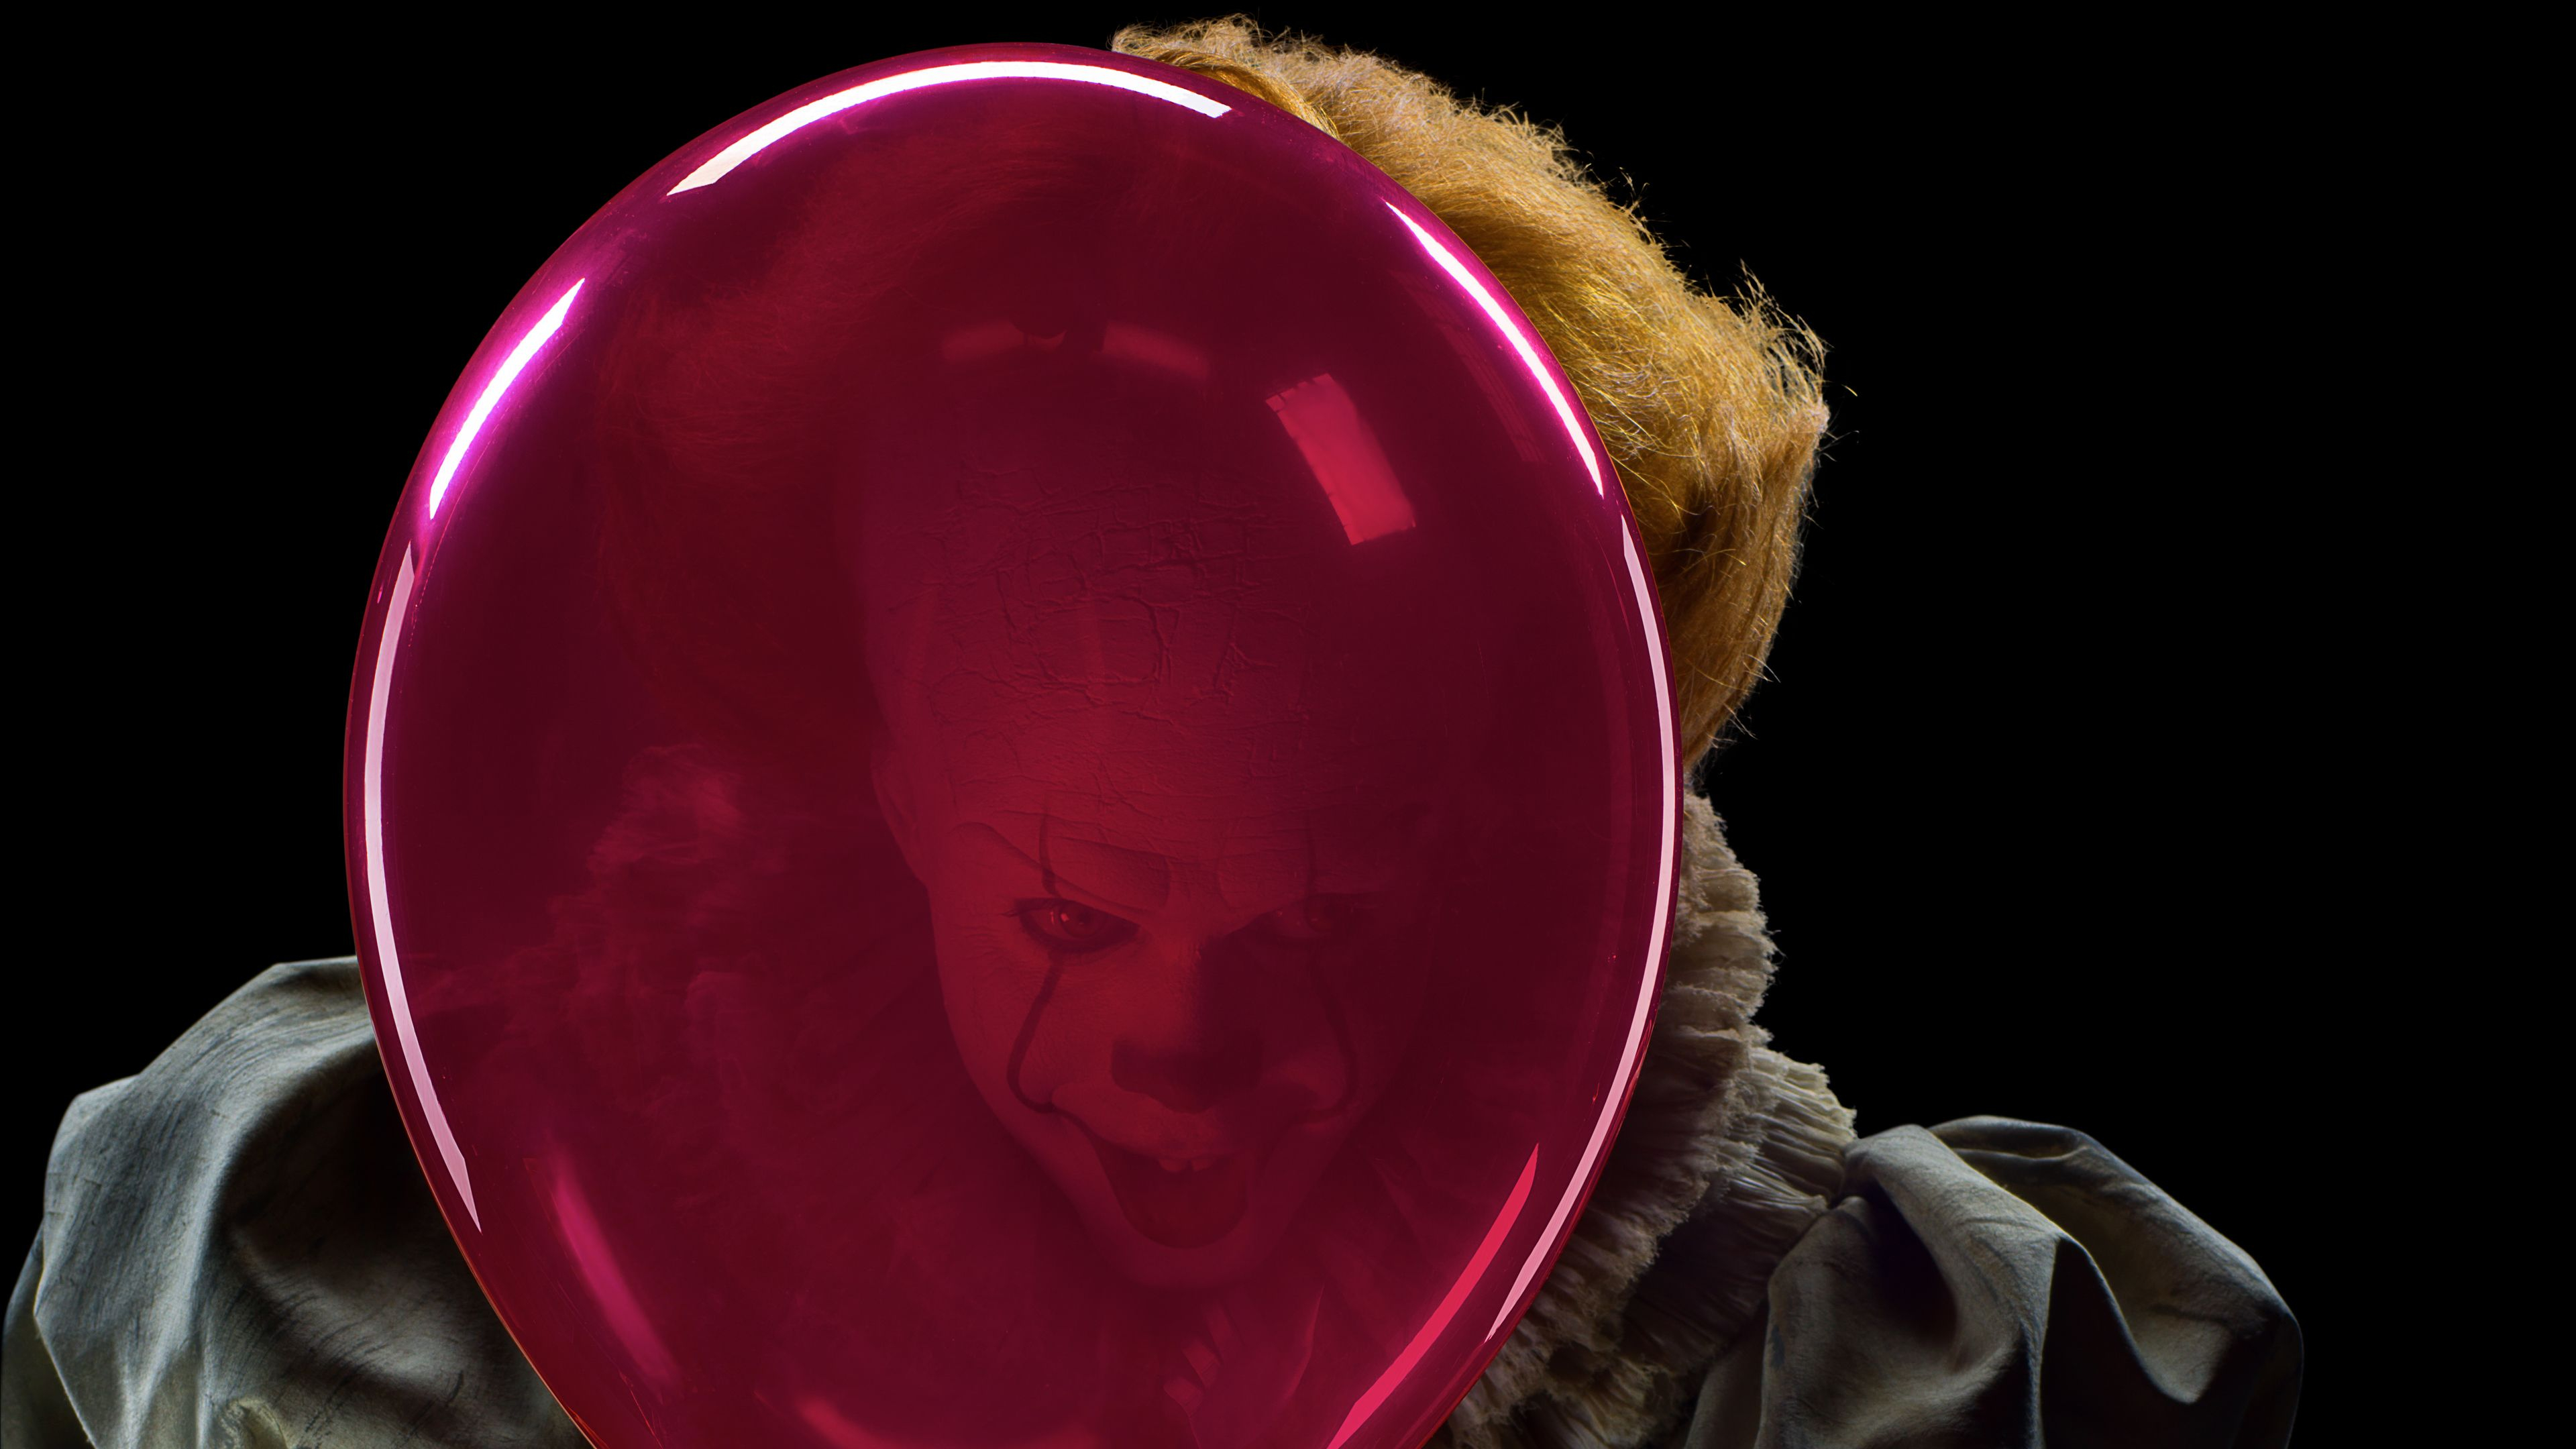 3840x2160 Pennywise The Clown It 4k pennywise wallpapers, movies wallpapers, it wallpapers, hd-wallpapers, clown wallpapers, 4k-wallp&acirc;&#128;&brvbar; | Pennywise the clown, Pennywise, Clow